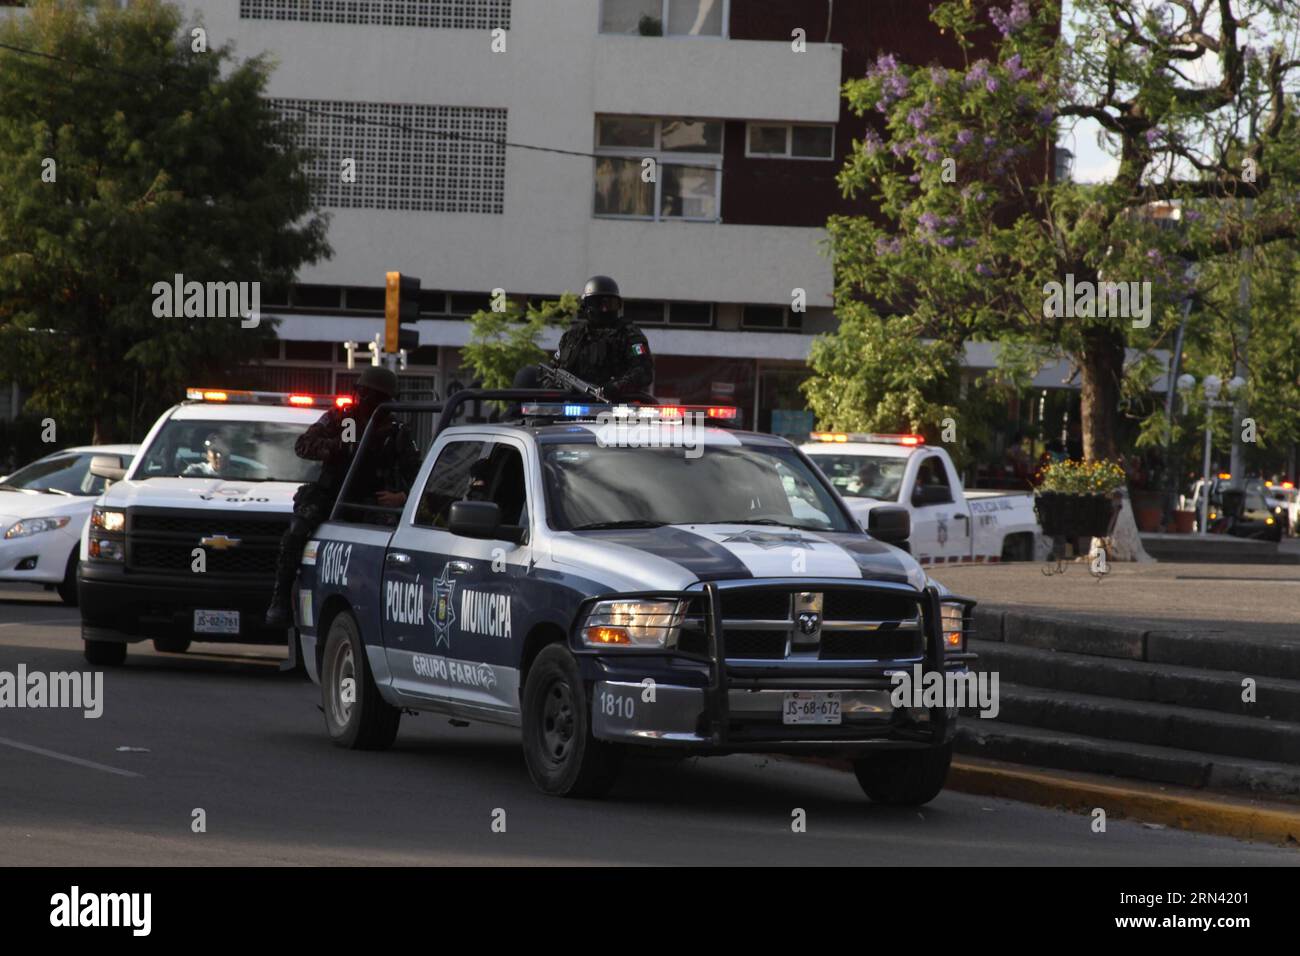 Policemen patrol a street after the violent acts on Friday in Guadalajara, Jalisco state, Mexico, on May 2, 2015. According to local press, At least seven people were killed and 19 others injured during an outbreak of violence early Friday in parts of Mexico s western state of Jalisco, where local government launched an operation against a drug cartel. Str) (da) MEXICO-JALISCO-SECURITY-VIOLENCE e STR PUBLICATIONxNOTxINxCHN   Policemen Patrol a Street After The Violent Acts ON Friday in Guadalajara Jalisco State Mexico ON May 2 2015 According to Local Press AT least Seven Celebrities Were KILLE Stock Photo